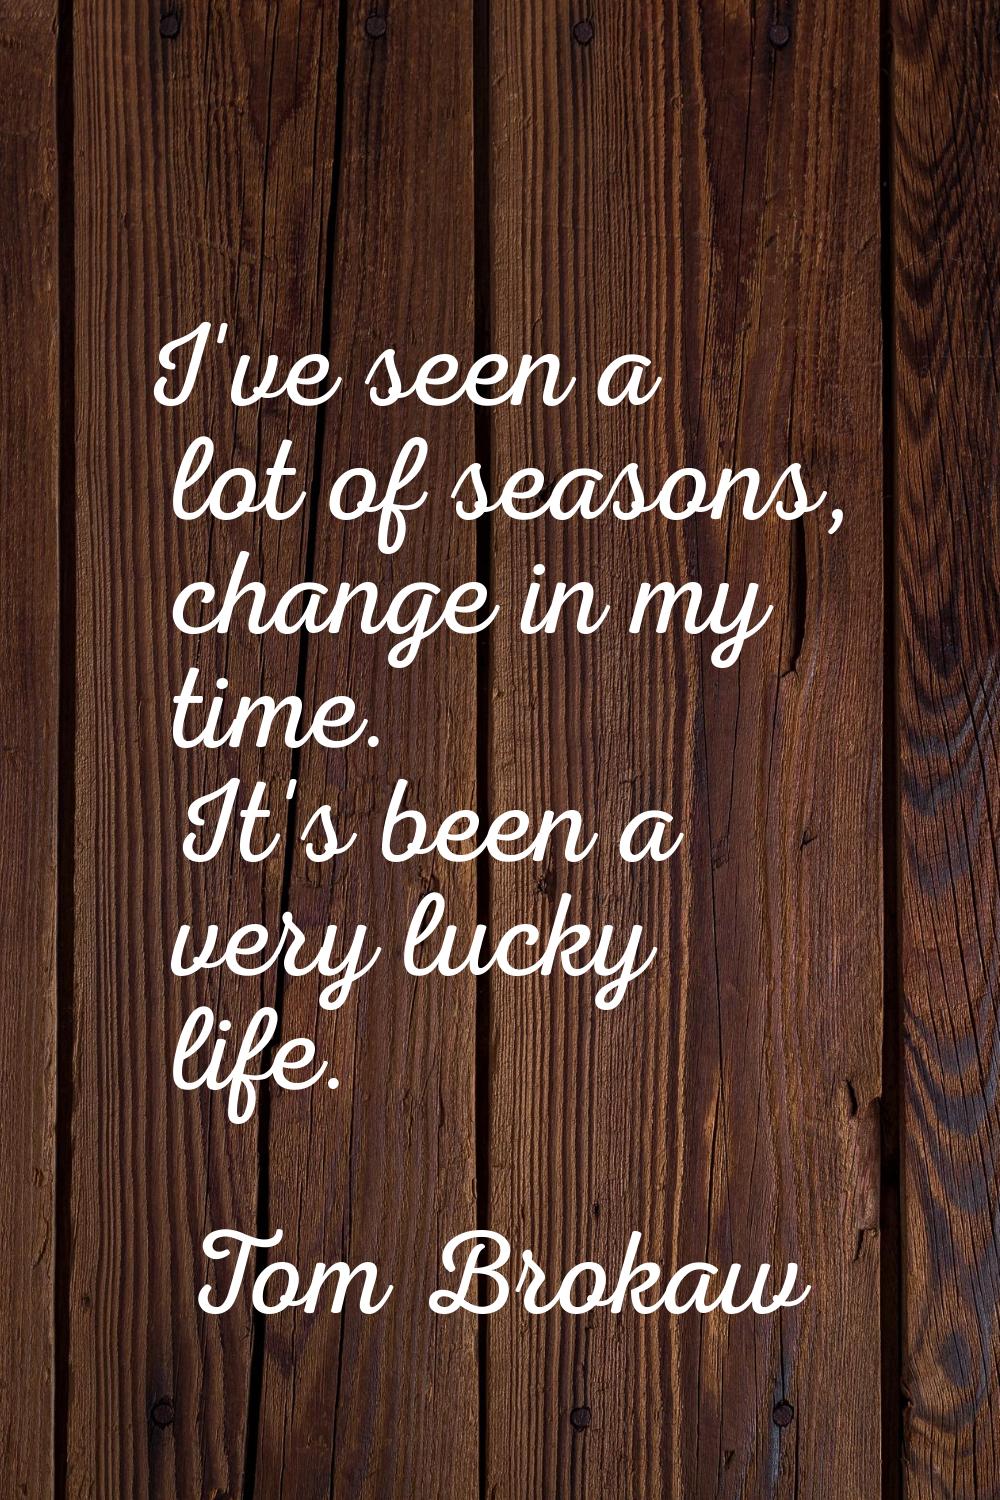 I've seen a lot of seasons, change in my time. It's been a very lucky life.